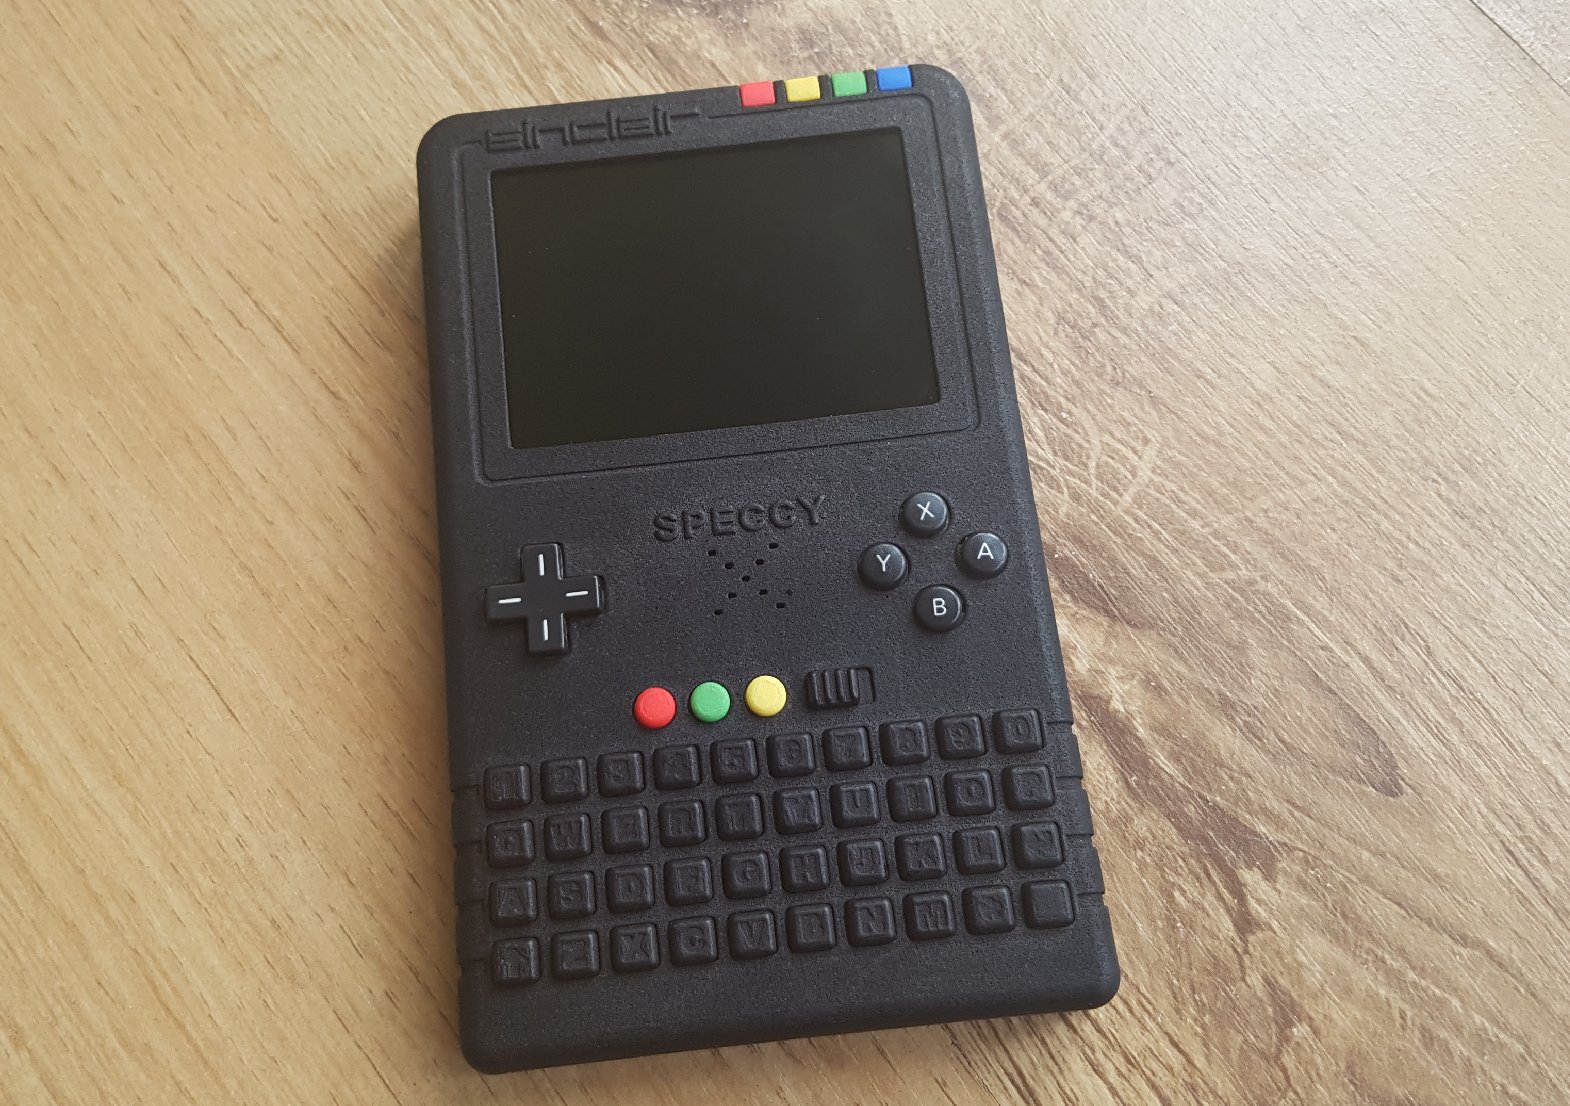 The finished Handheld 3.5